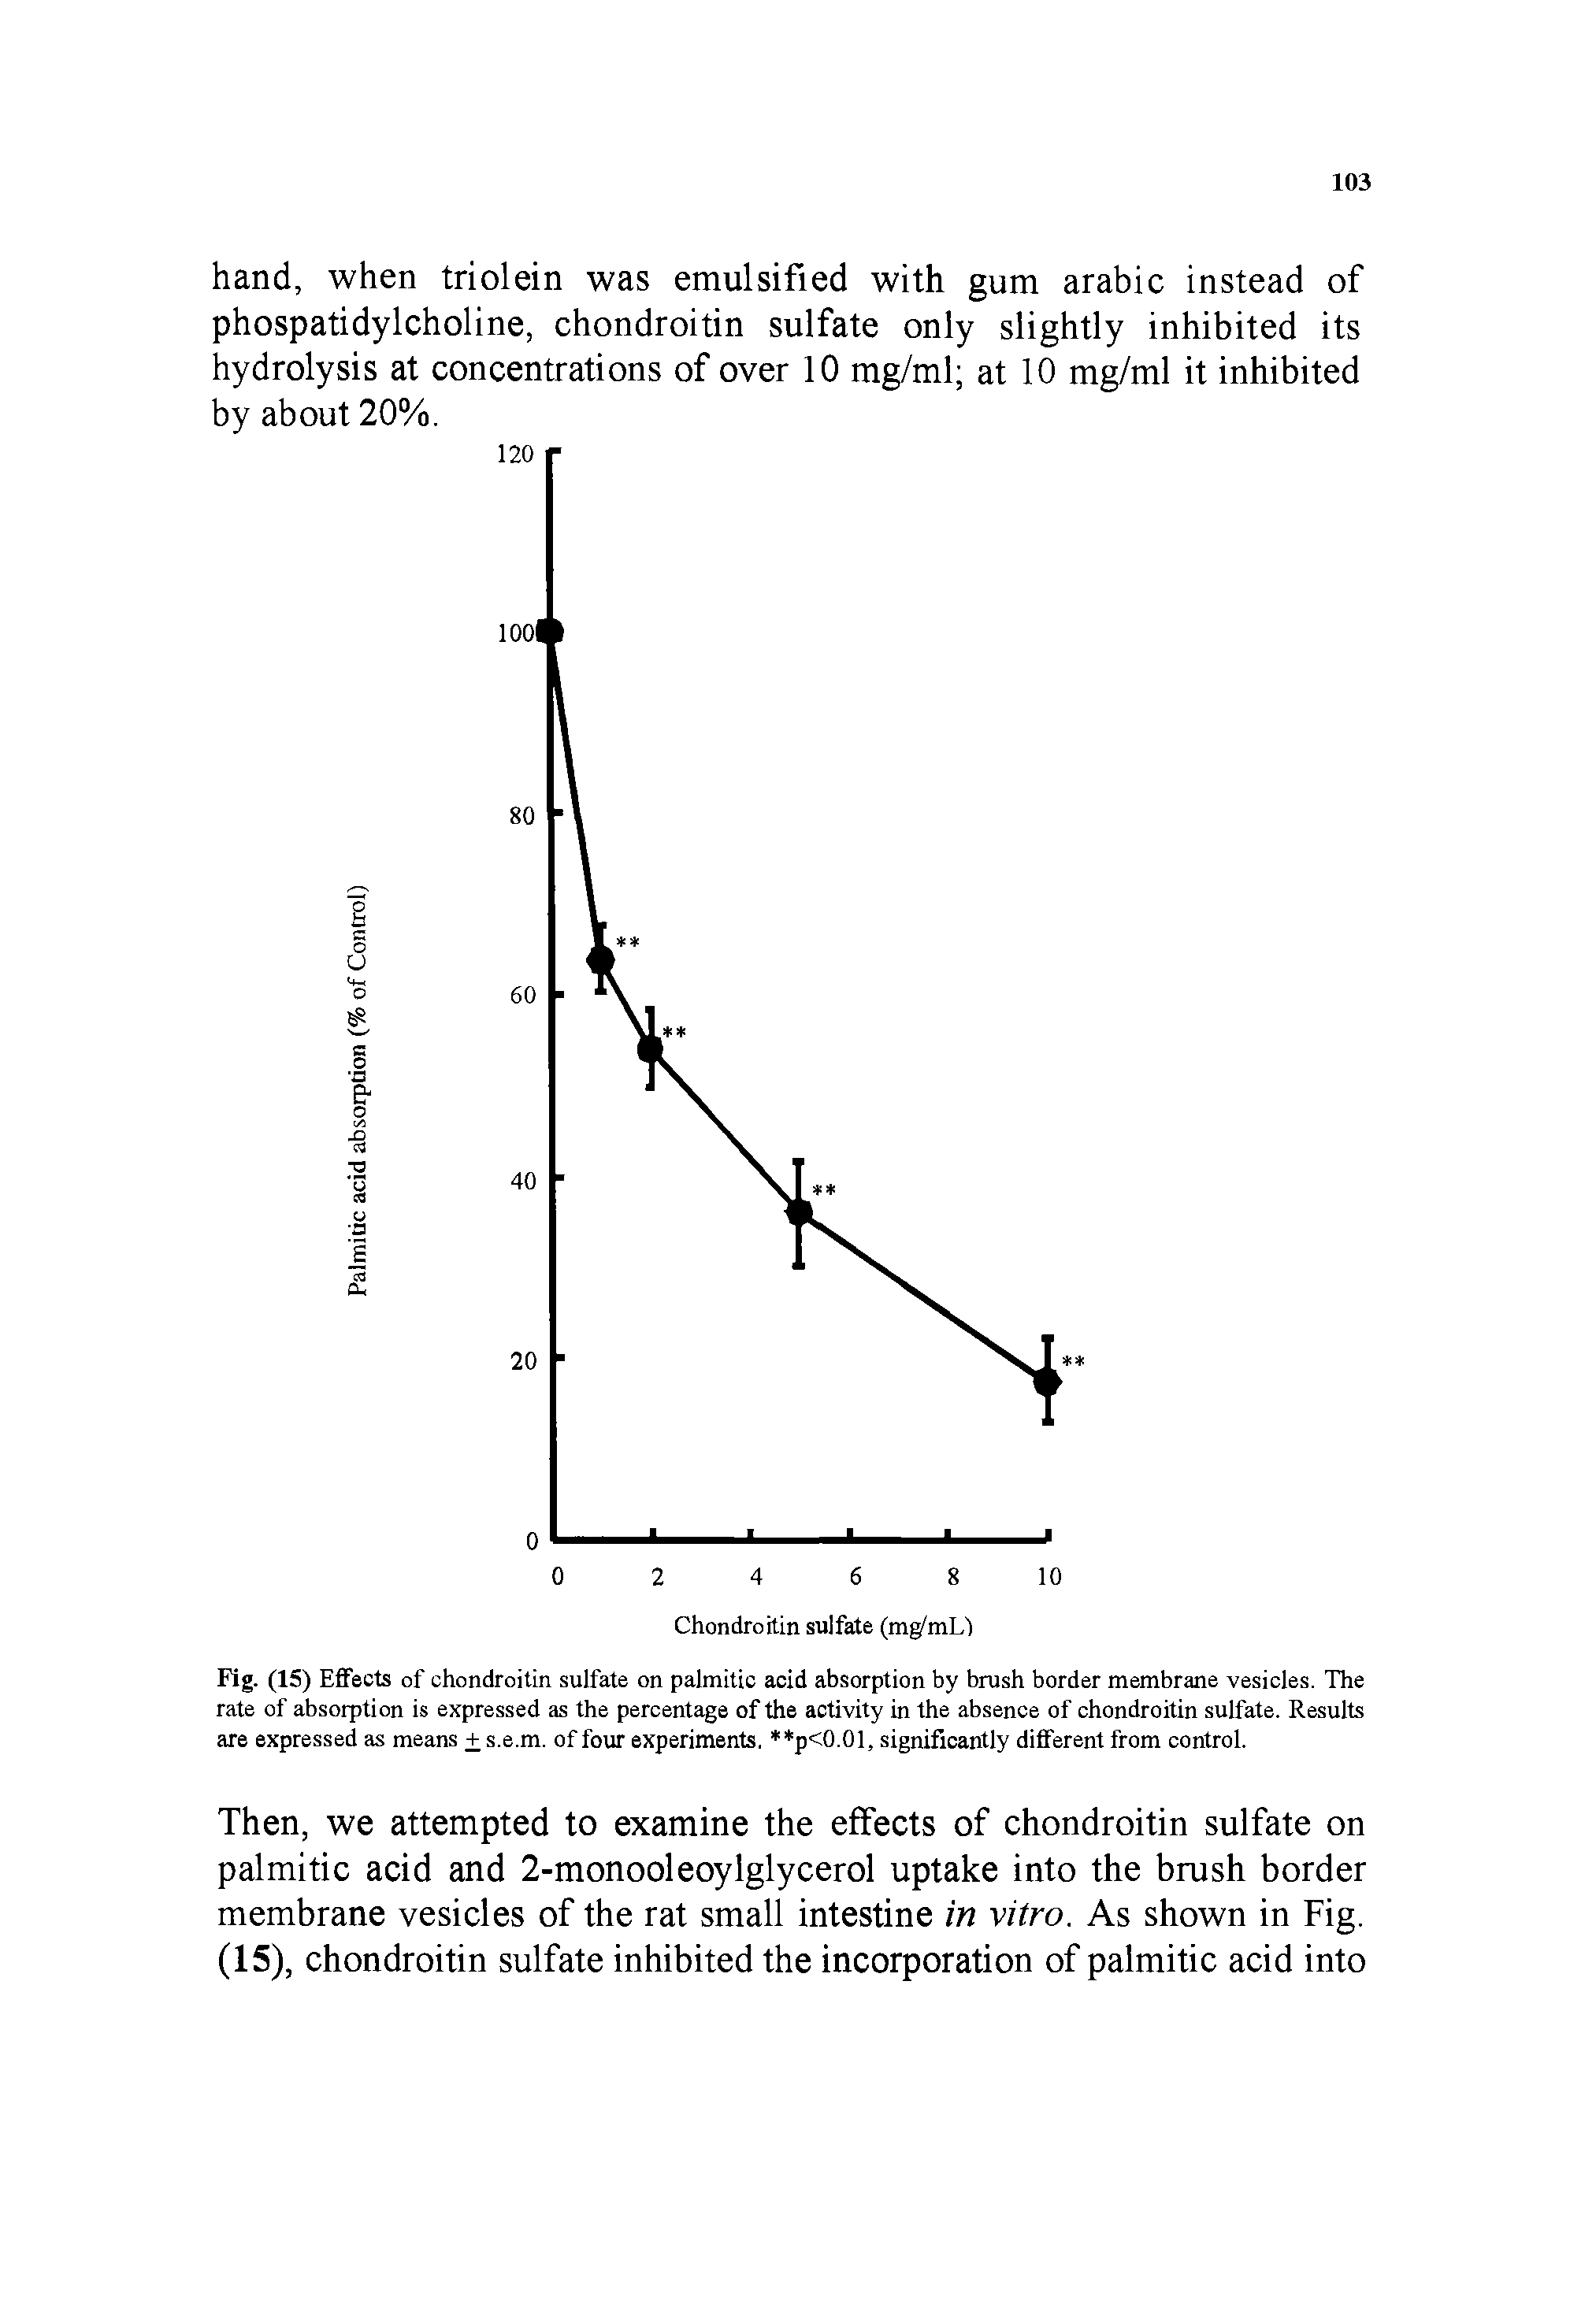 Fig. (15) Effects of chondroitin sulfate on palmitic acid absorption by brush border membrane vesicles. The rate of absorption is expressed as the percentage of the activity in the absence of chondroitin sulfate. Results are expressed as means + s.e.m. of four experiments. p<0.01, significantly different from control.